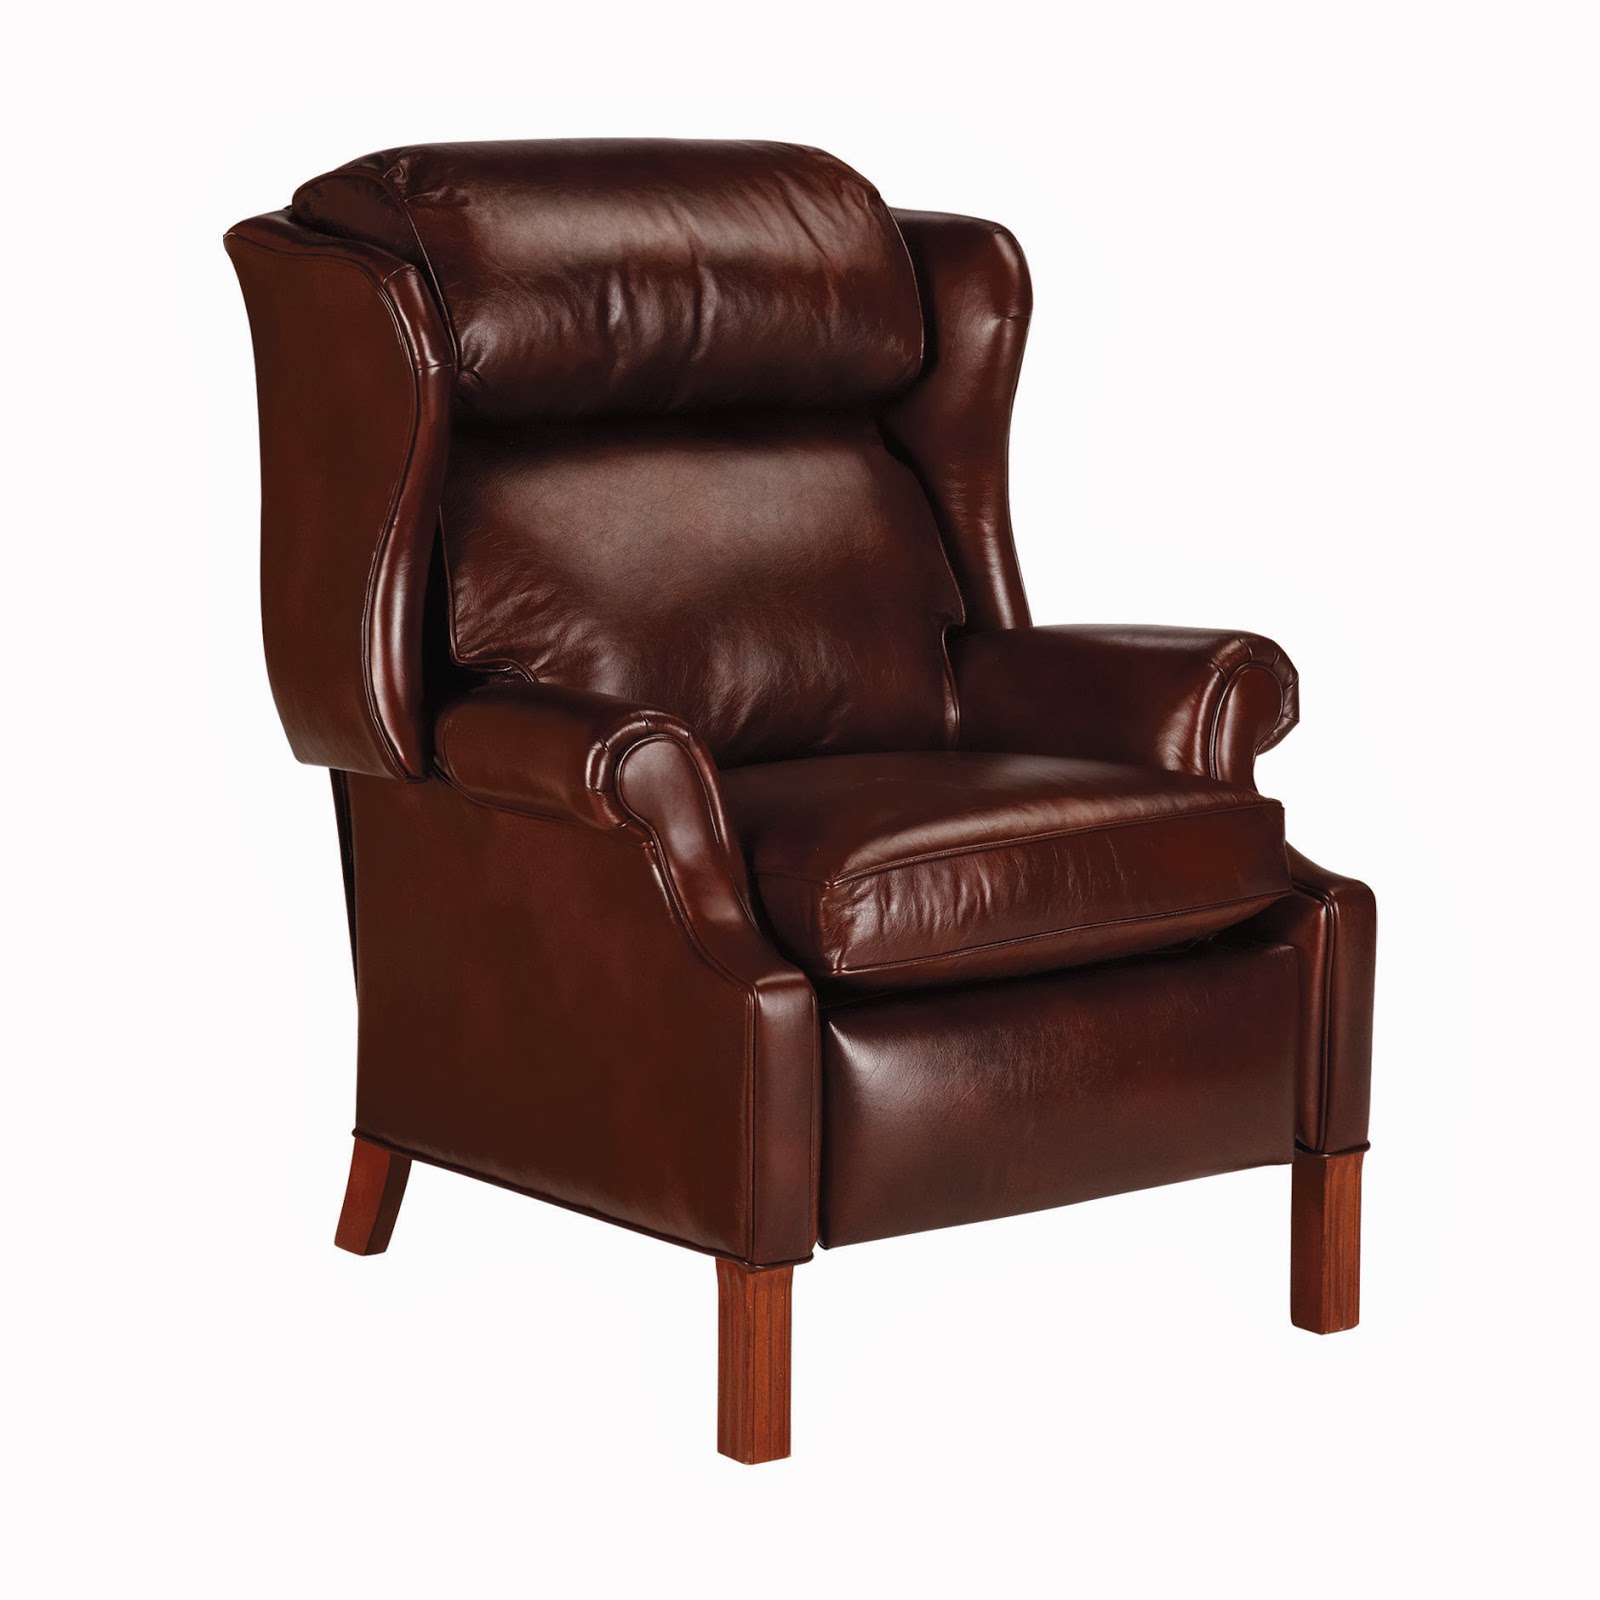 House Revivals How to Dye a Leather Sofa or Chair